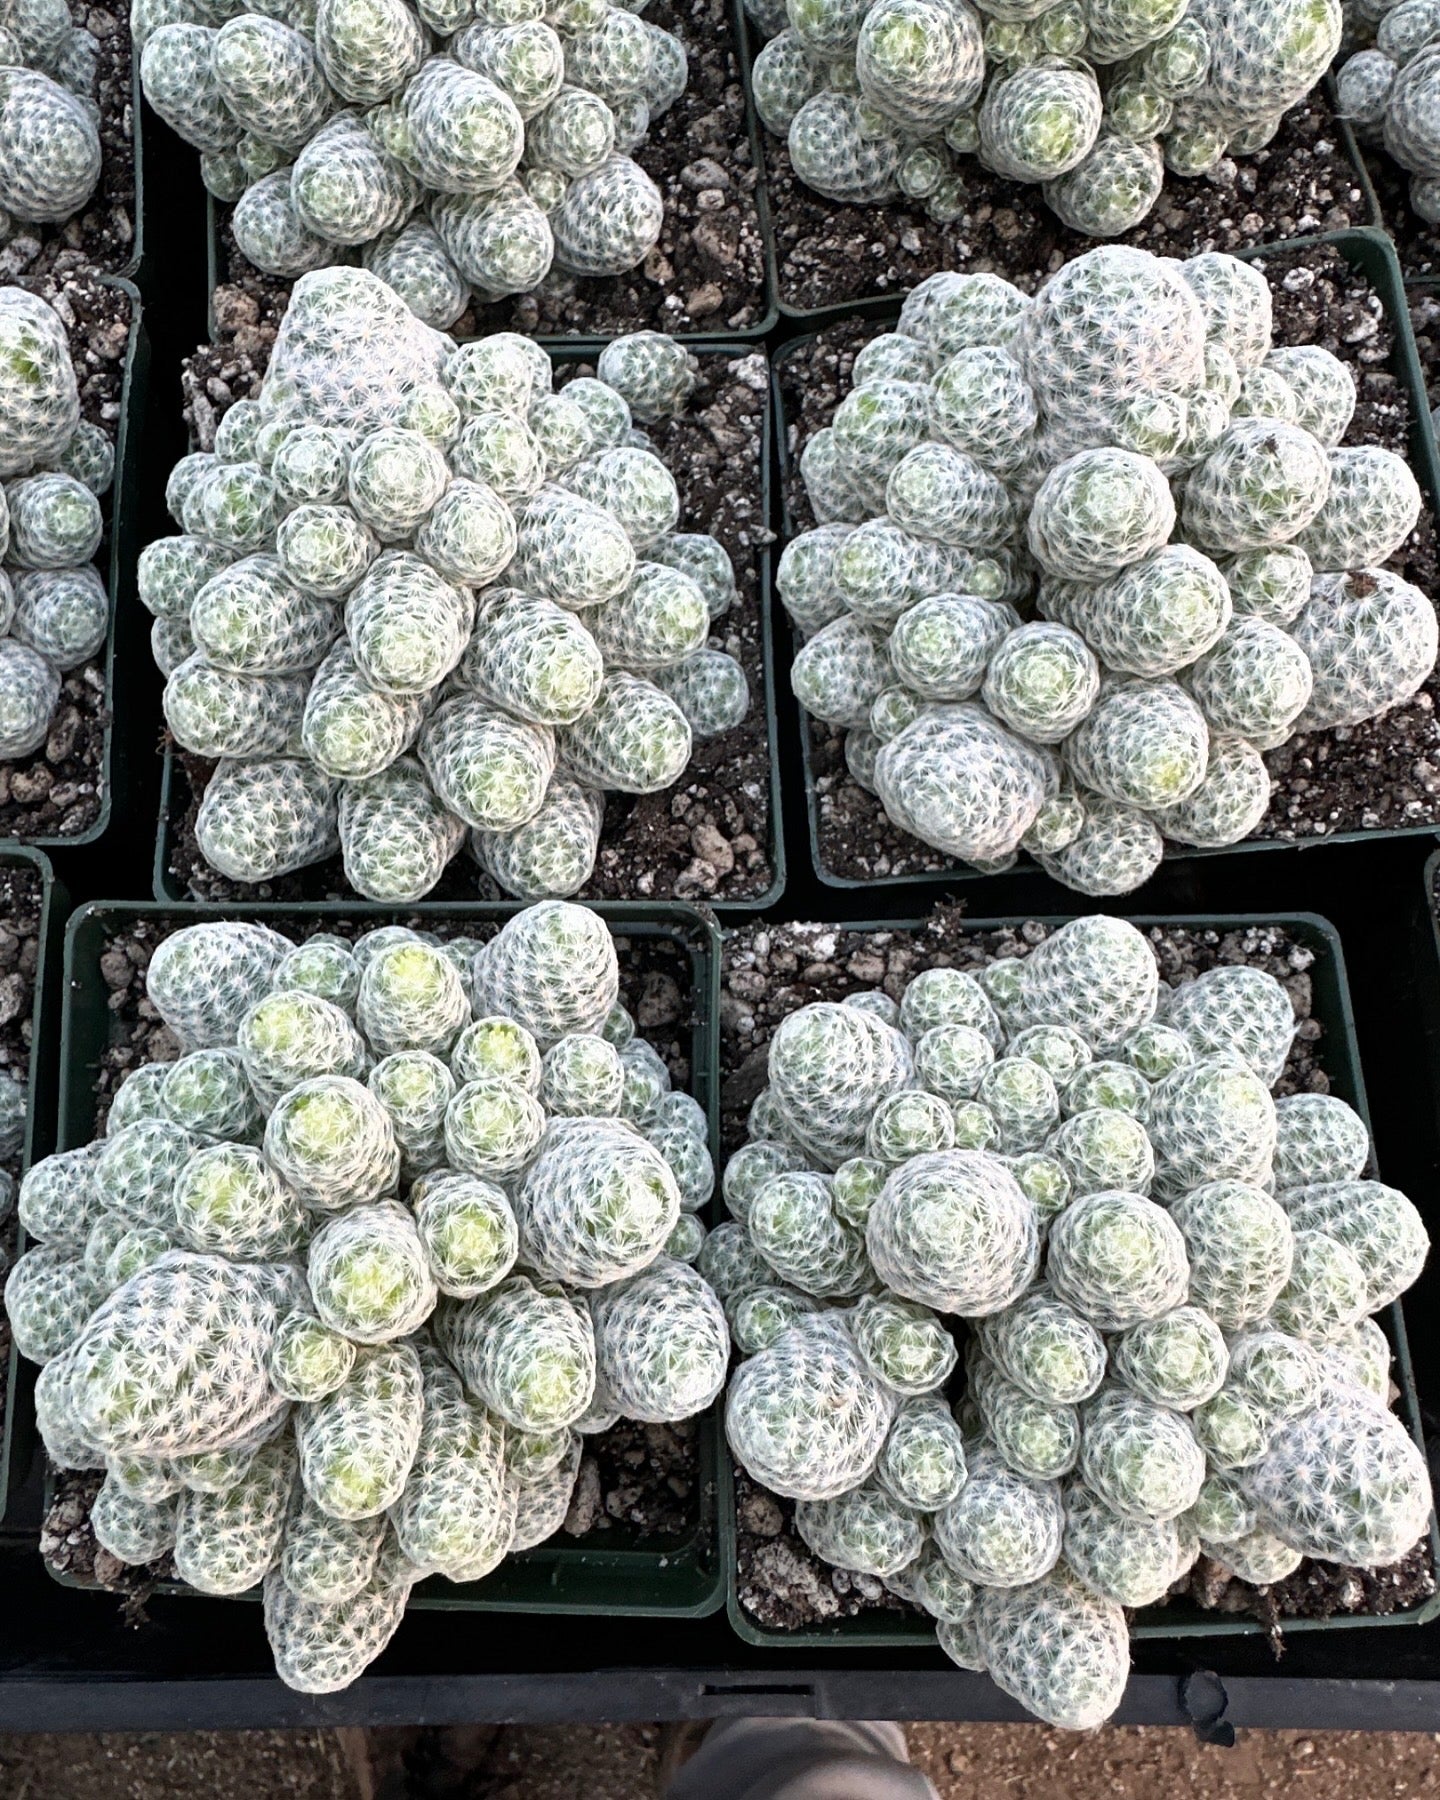 Mammillaria humboldtii cactus in 4.25 inch pot, most overgrowing pot pack of 3 plants! Cheap deal